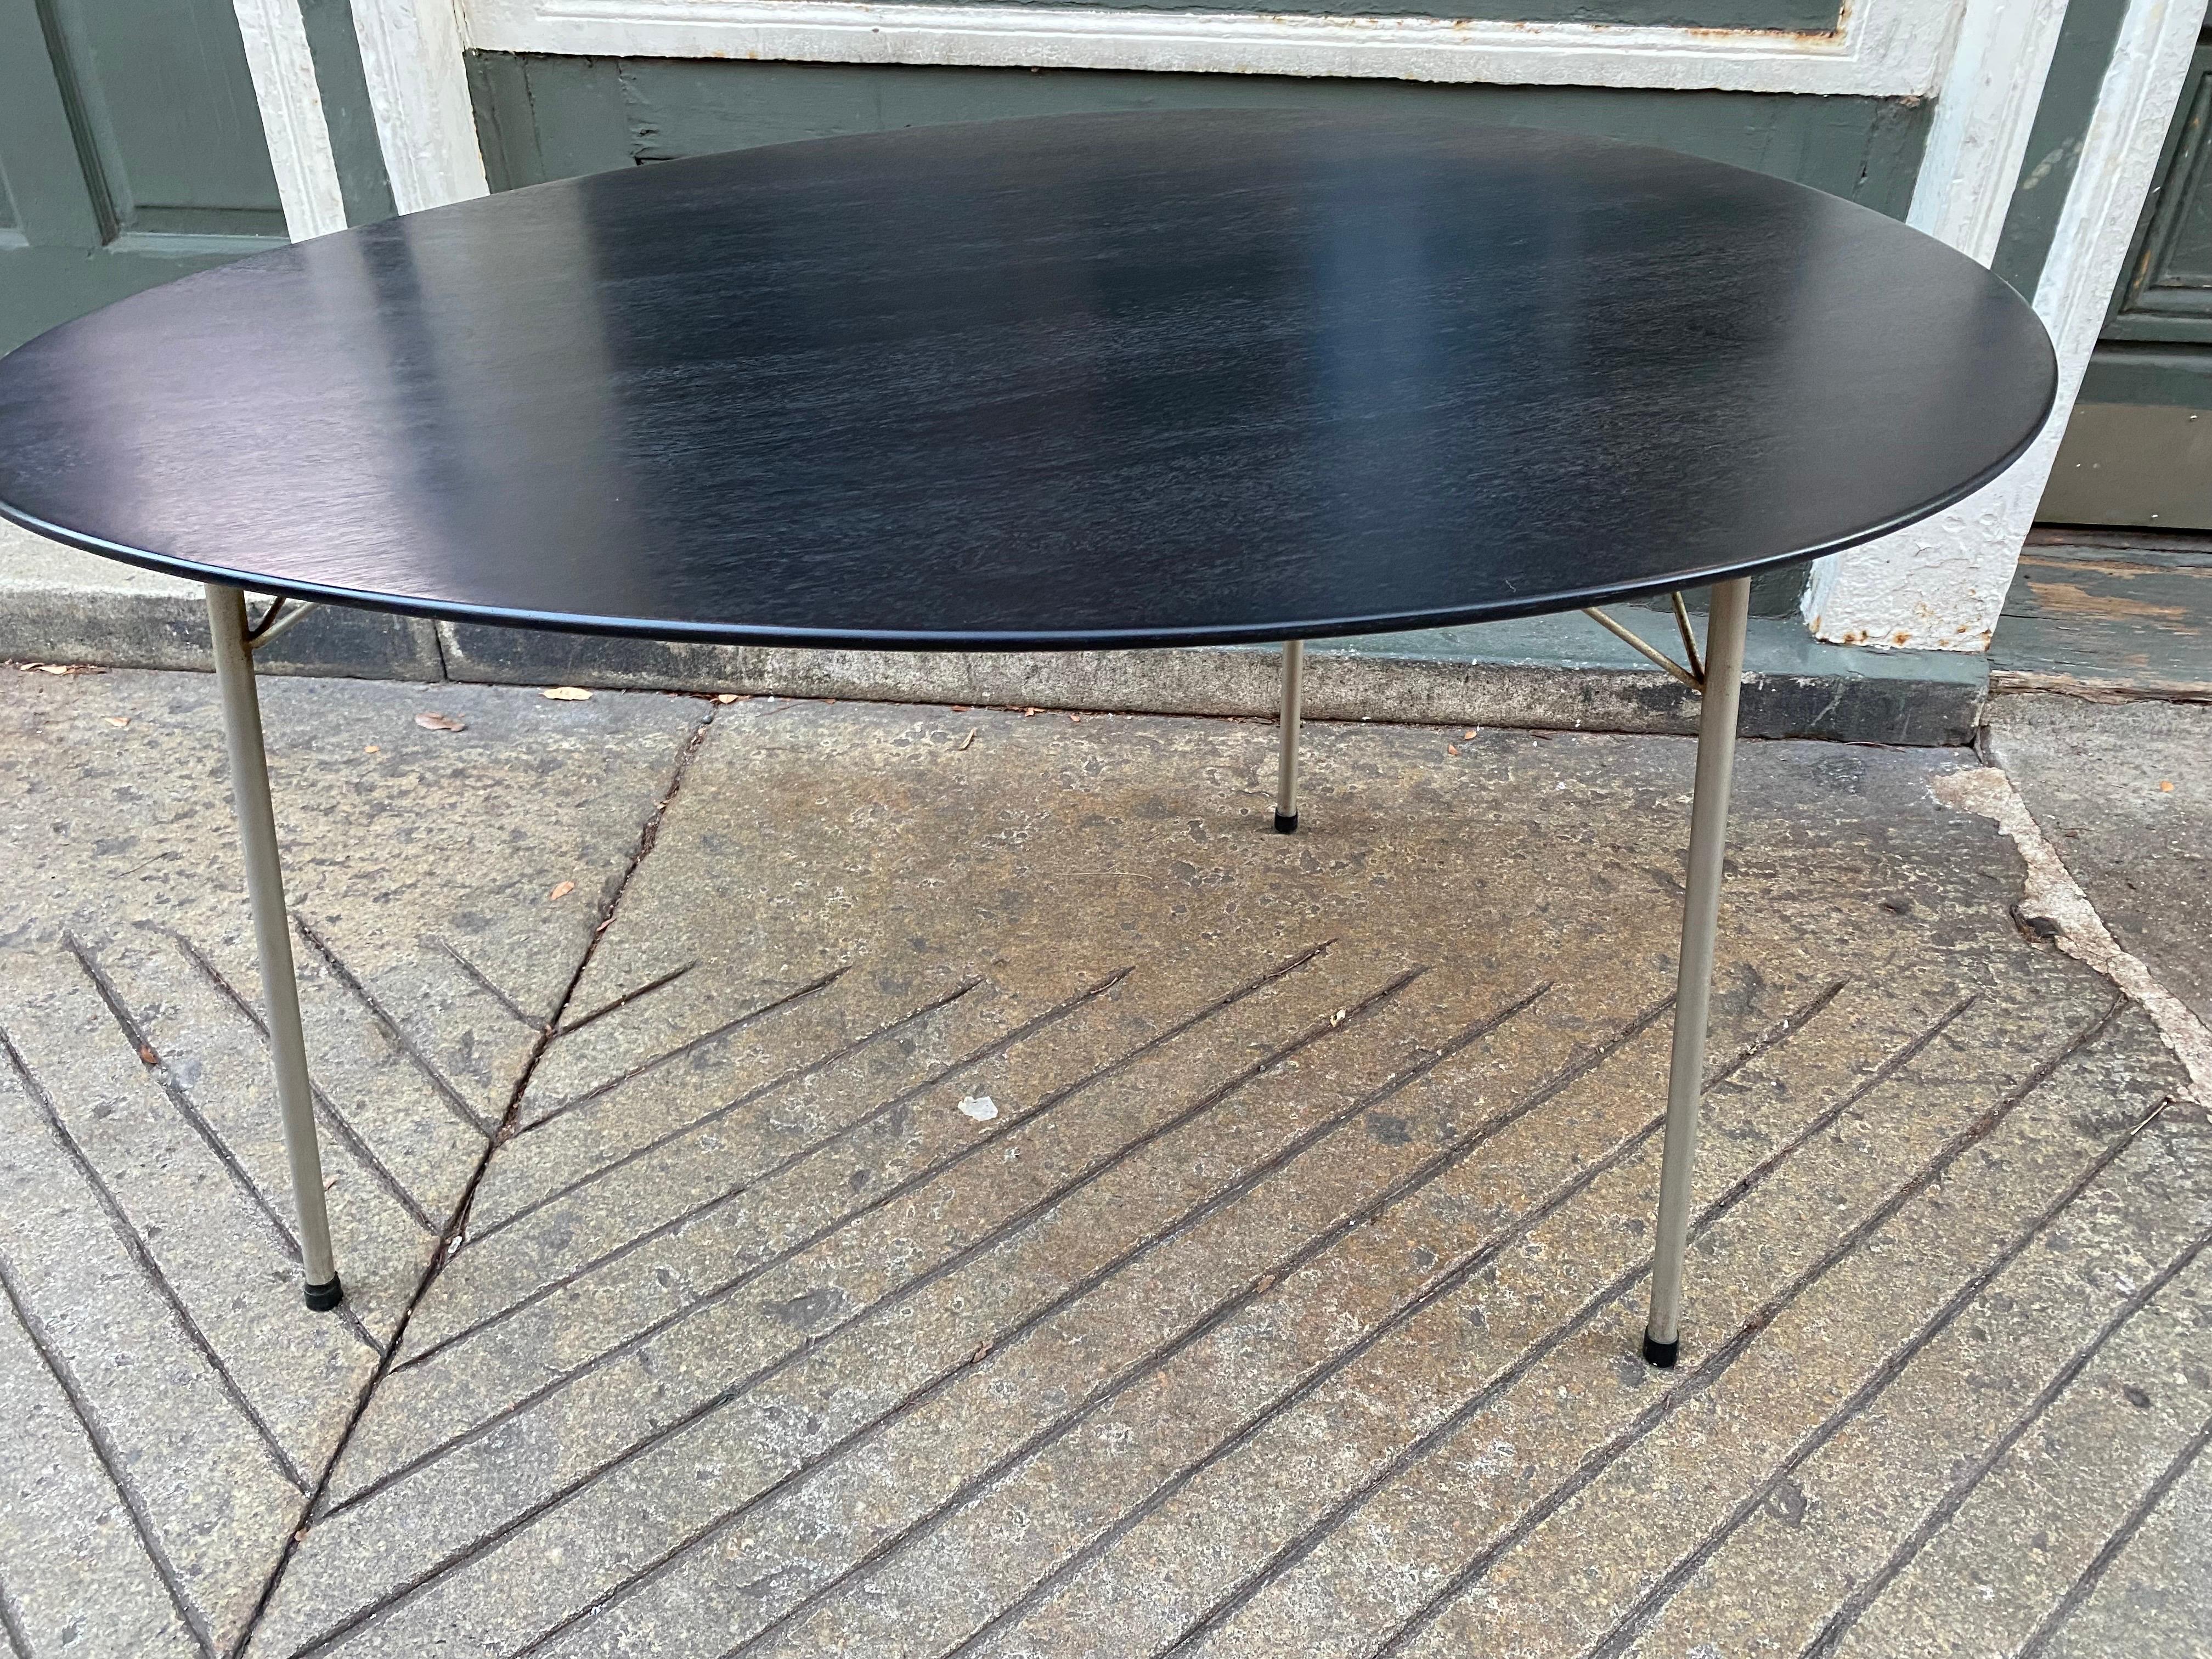 Arne Jacobsen egg table. Newly refinished ebonized black finish. Perfect to use in a small dining area or as a writing desk. Great classic Danish design!